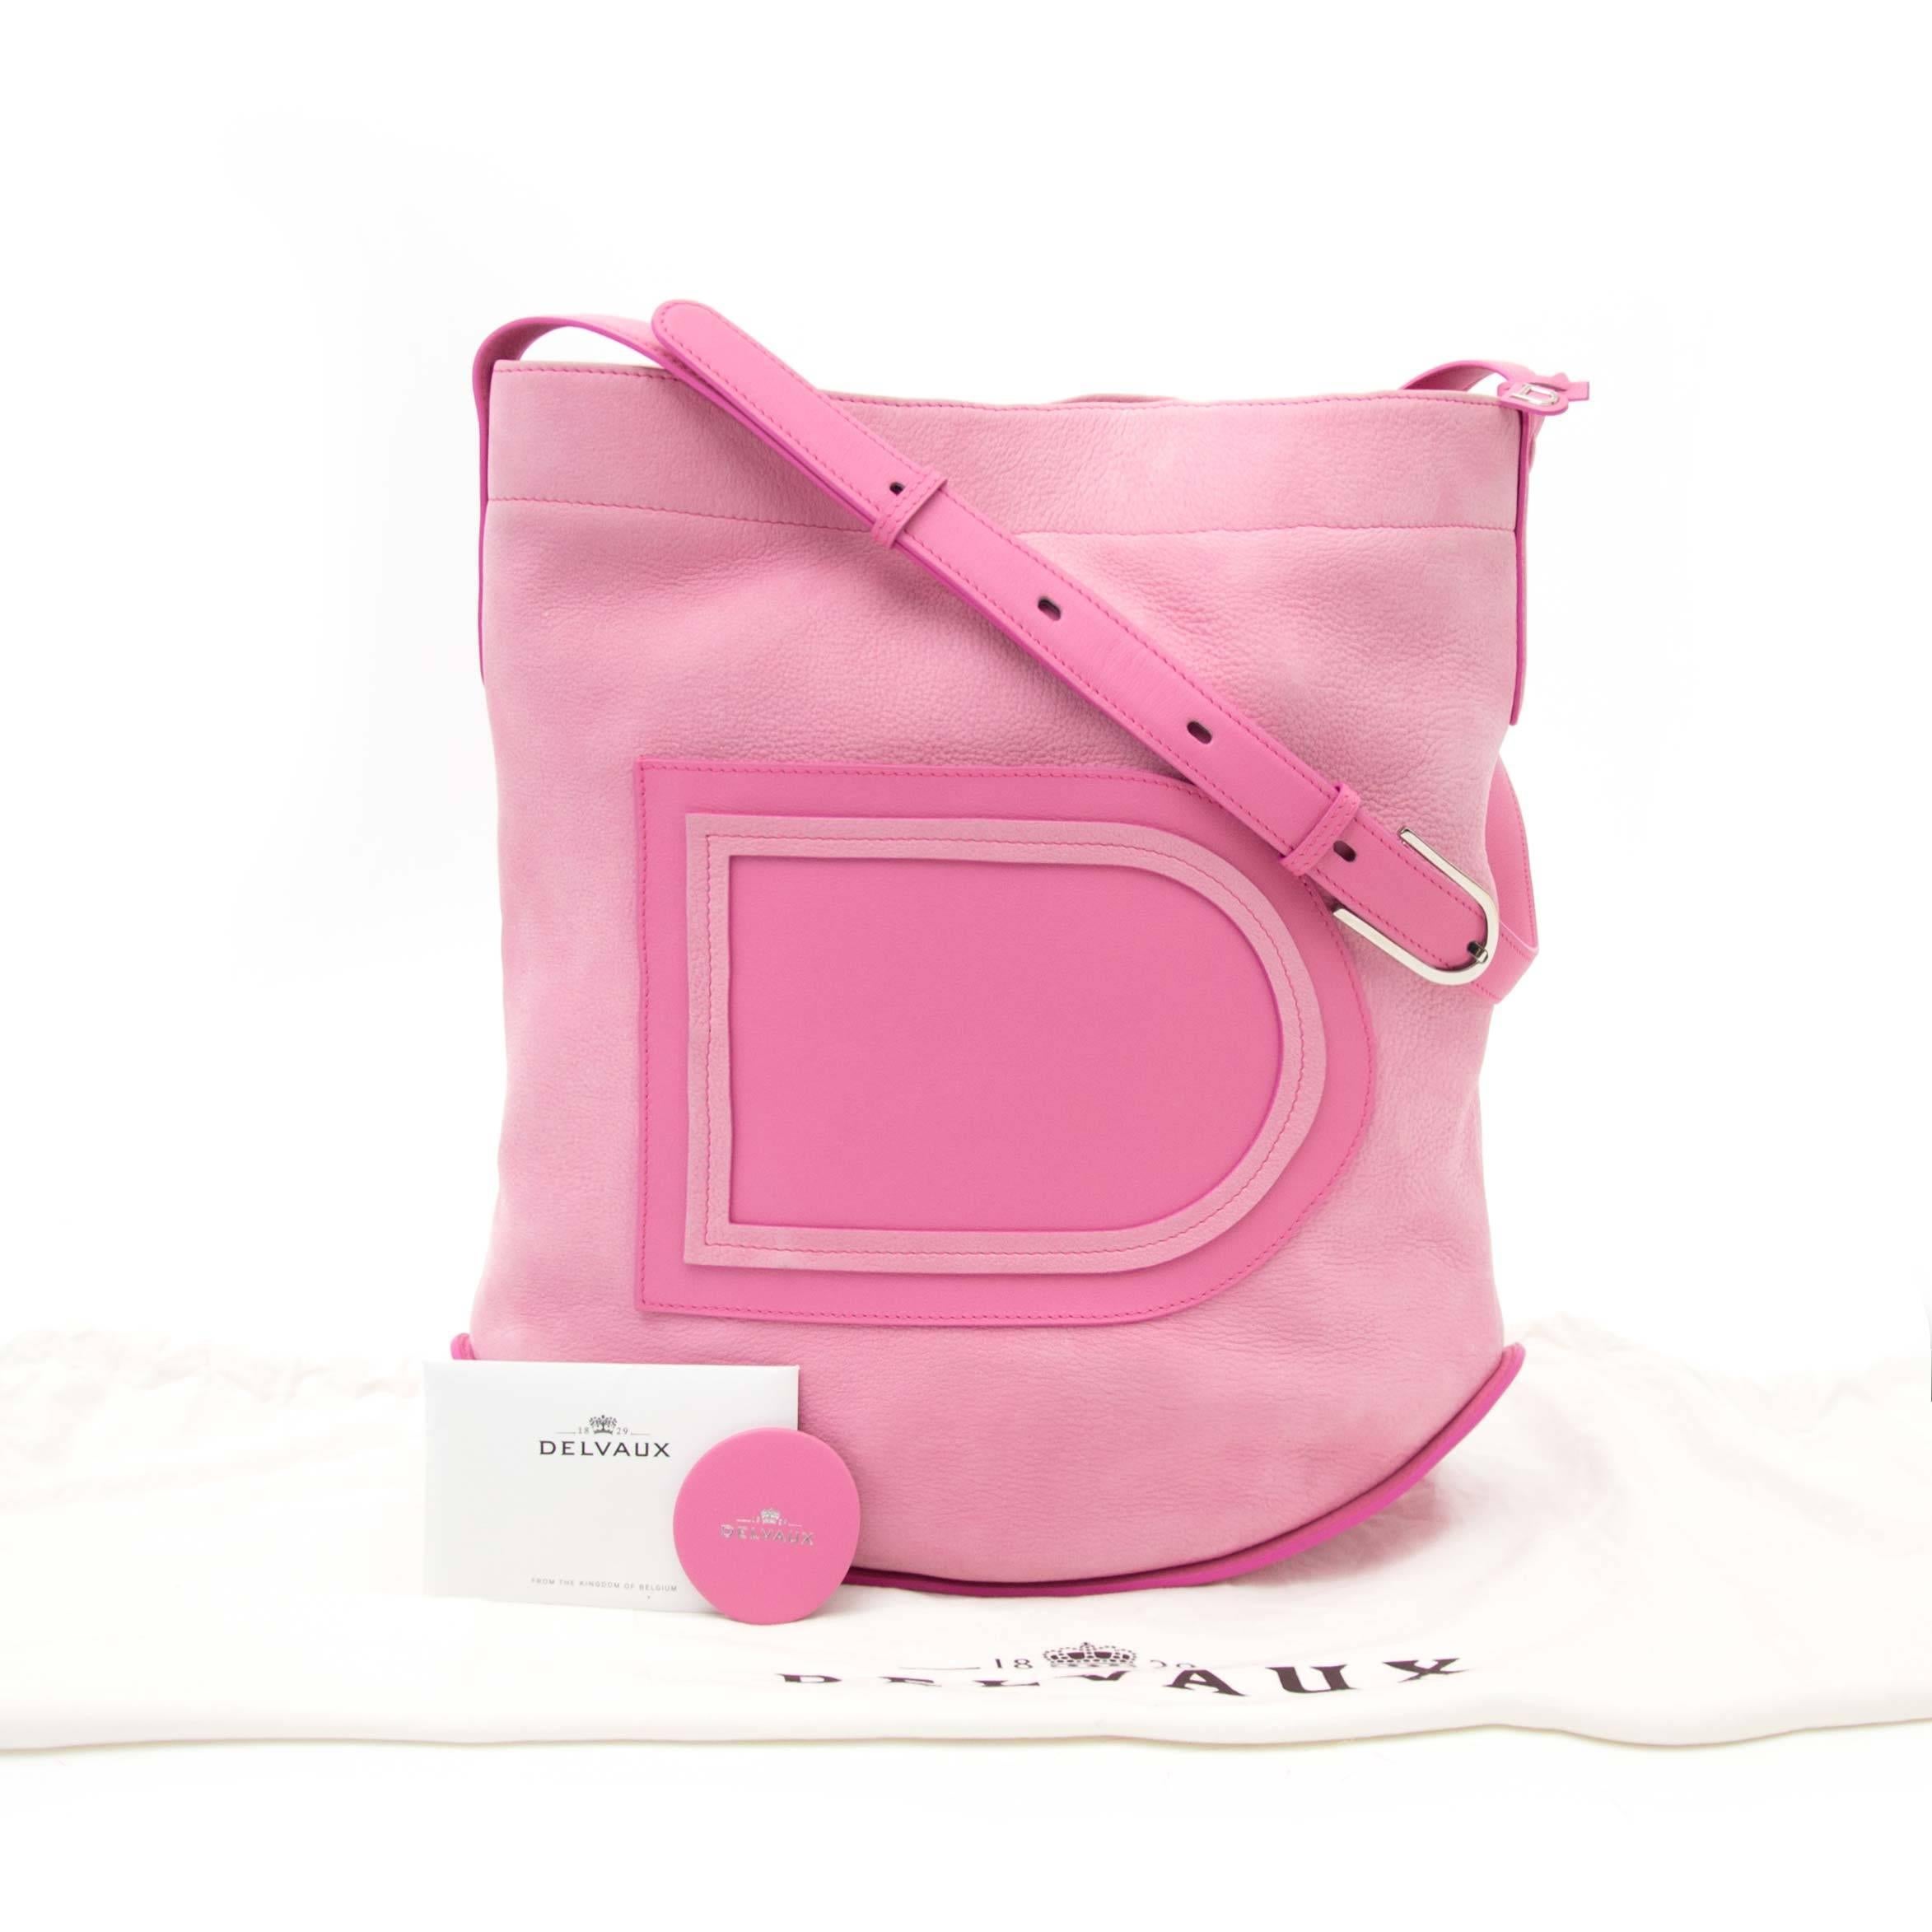 Excellent Preloved Condition

Estimated retail price €1650,-

Delvaux Flamingo Rose Allure Nubuck Le Pin  

This classic Delvaux shoulderbag comes in an elegant rose allure nubuck  leather and features the iconic Delvaux logo.
The Pin has a curvy